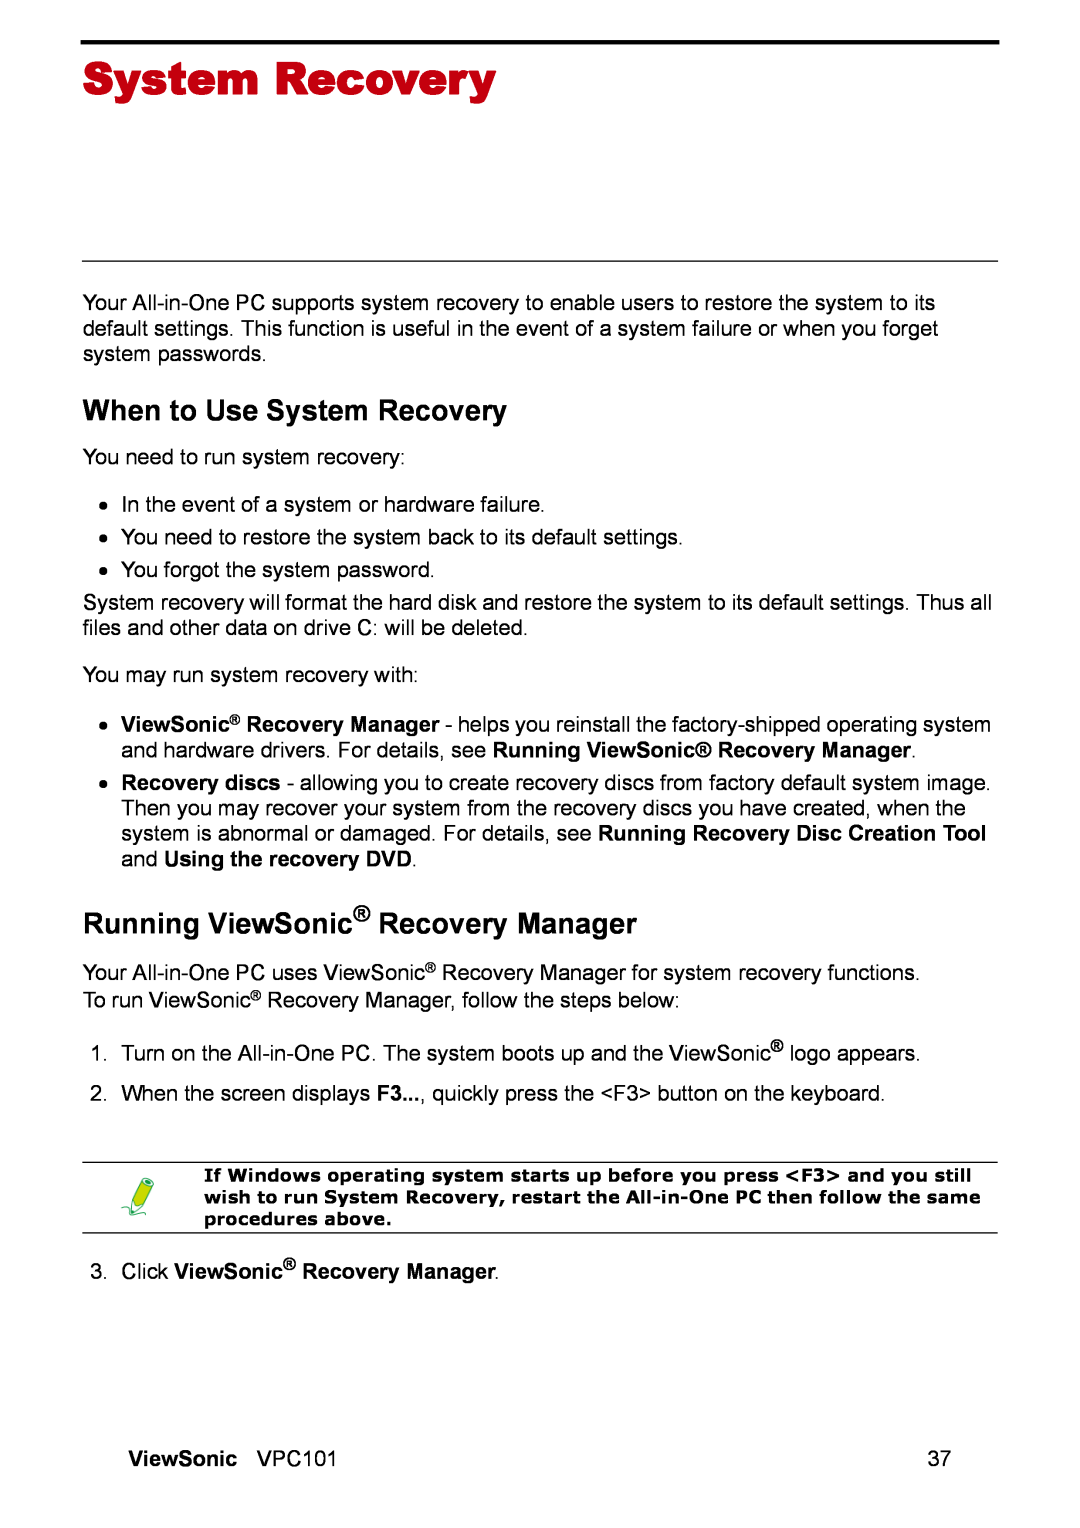 ViewSonic VS12602 manual When to Use System Recovery, Running ViewSonic Recovery Manager 